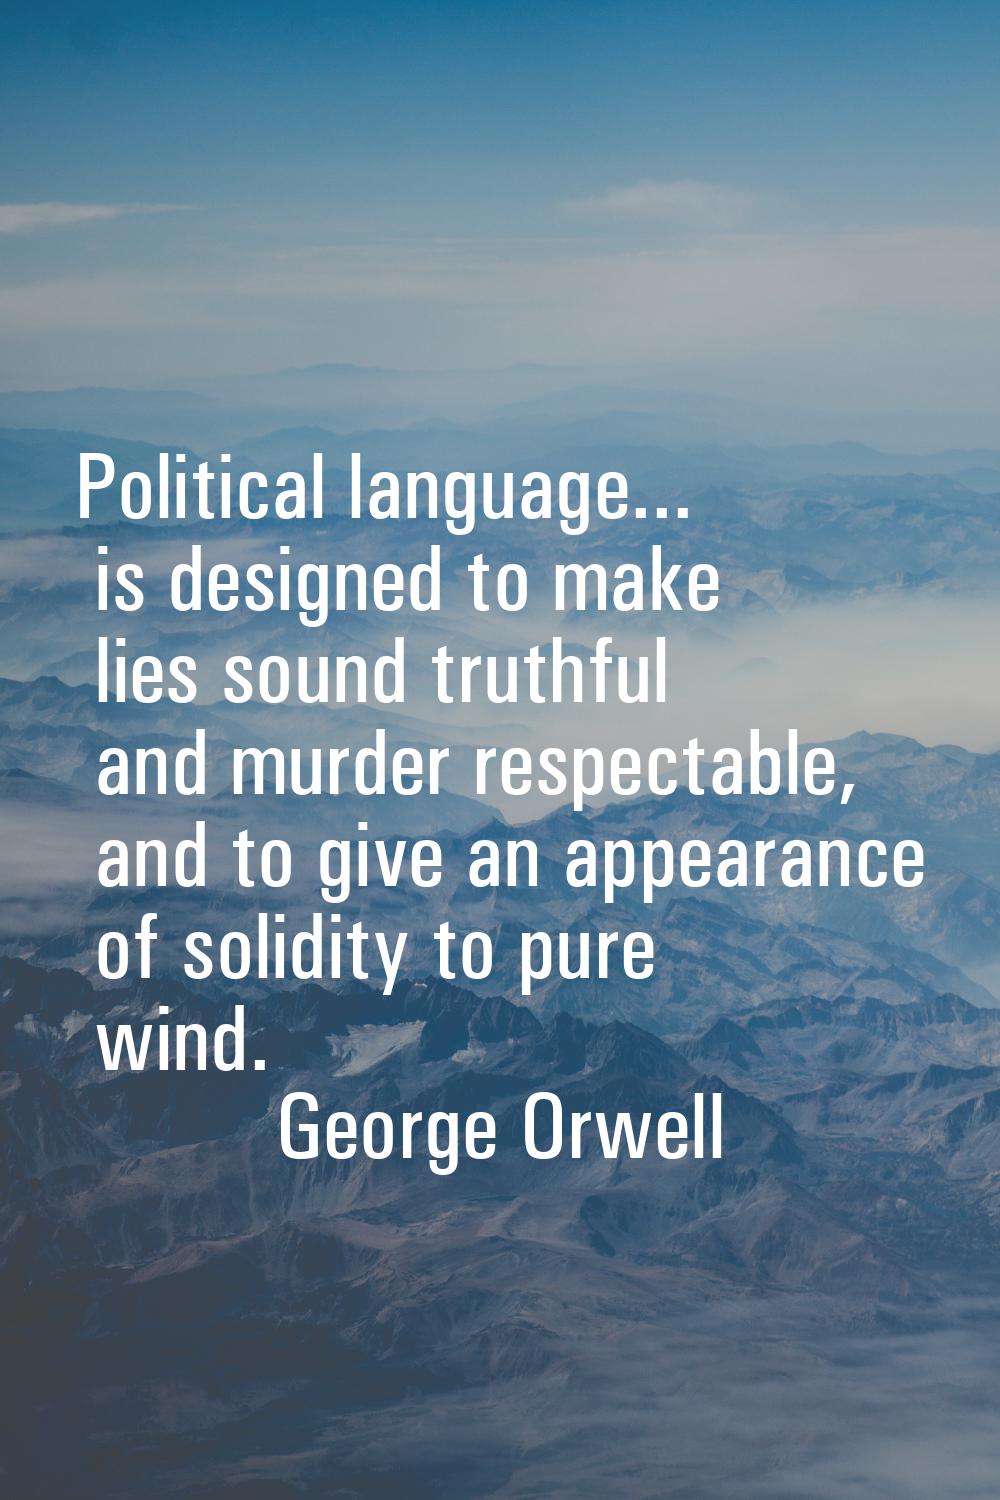 Political language... is designed to make lies sound truthful and murder respectable, and to give a